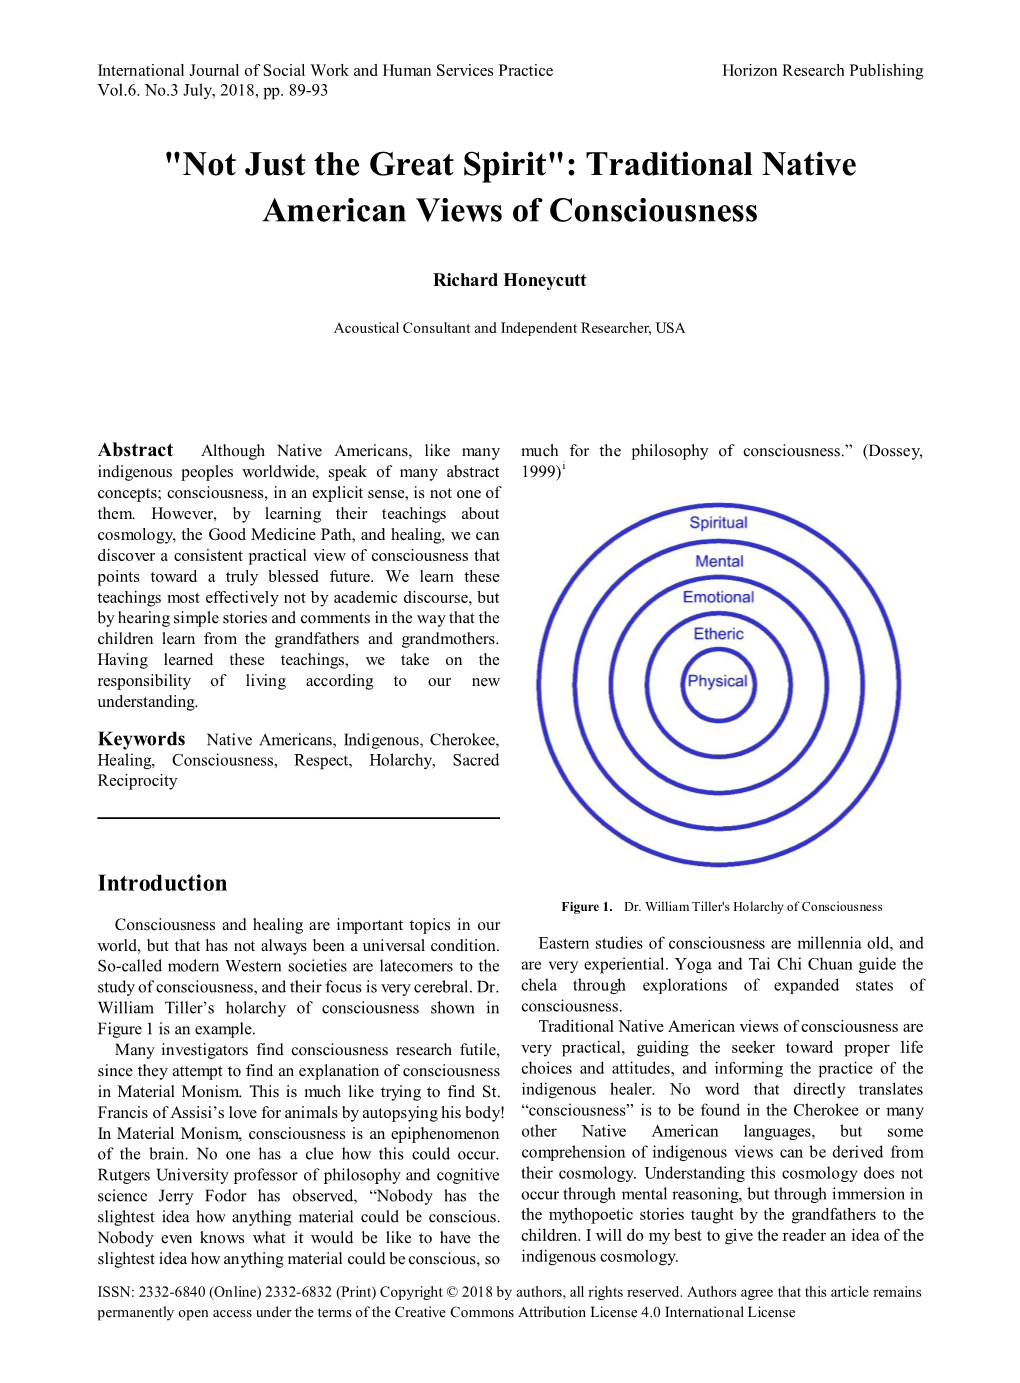 Traditional Native American Views of Consciousness